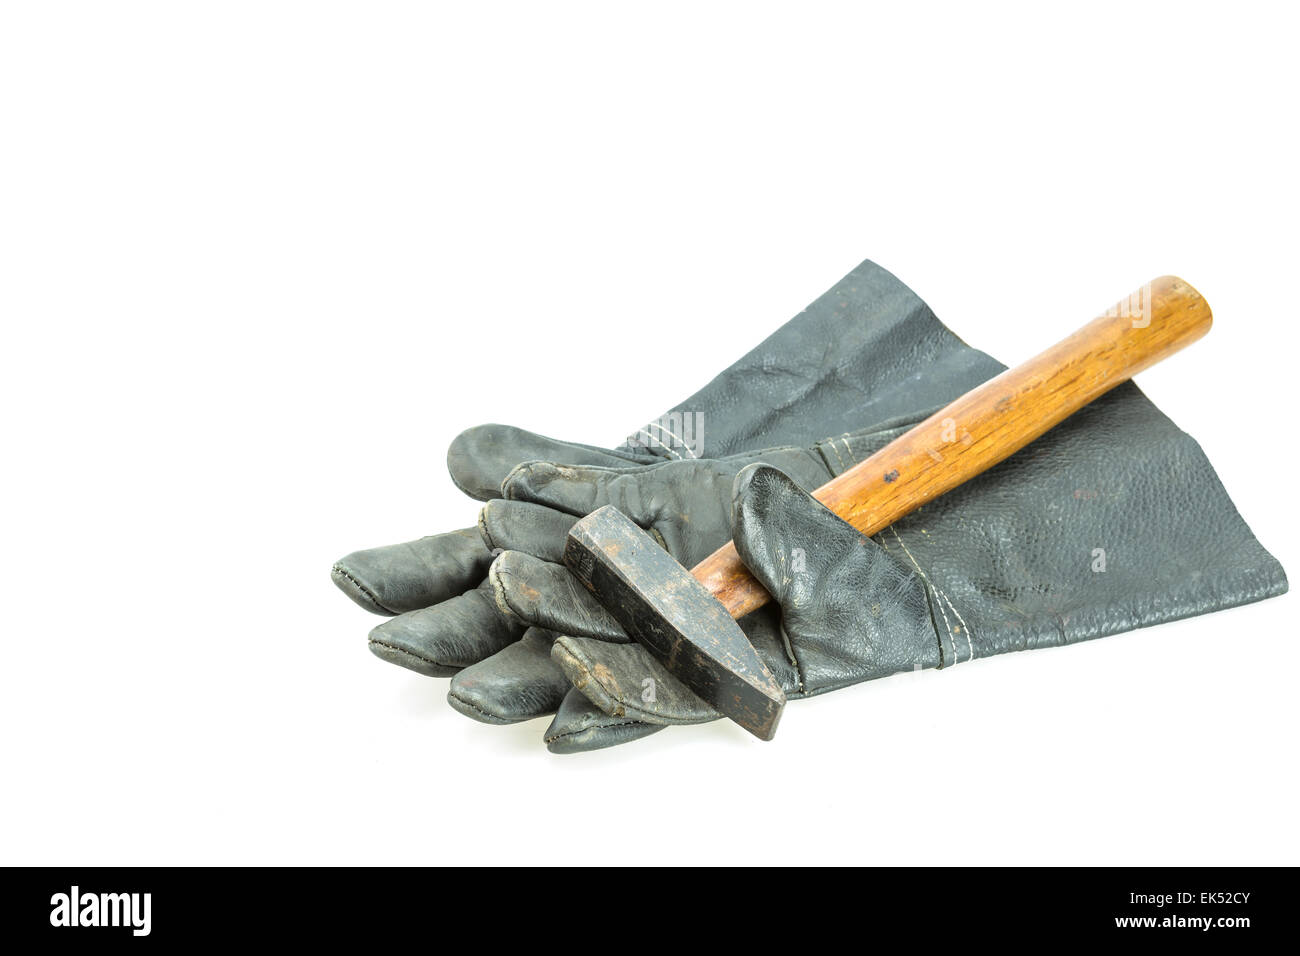 Black safety work glove and hammer isolated on white background Stock Photo